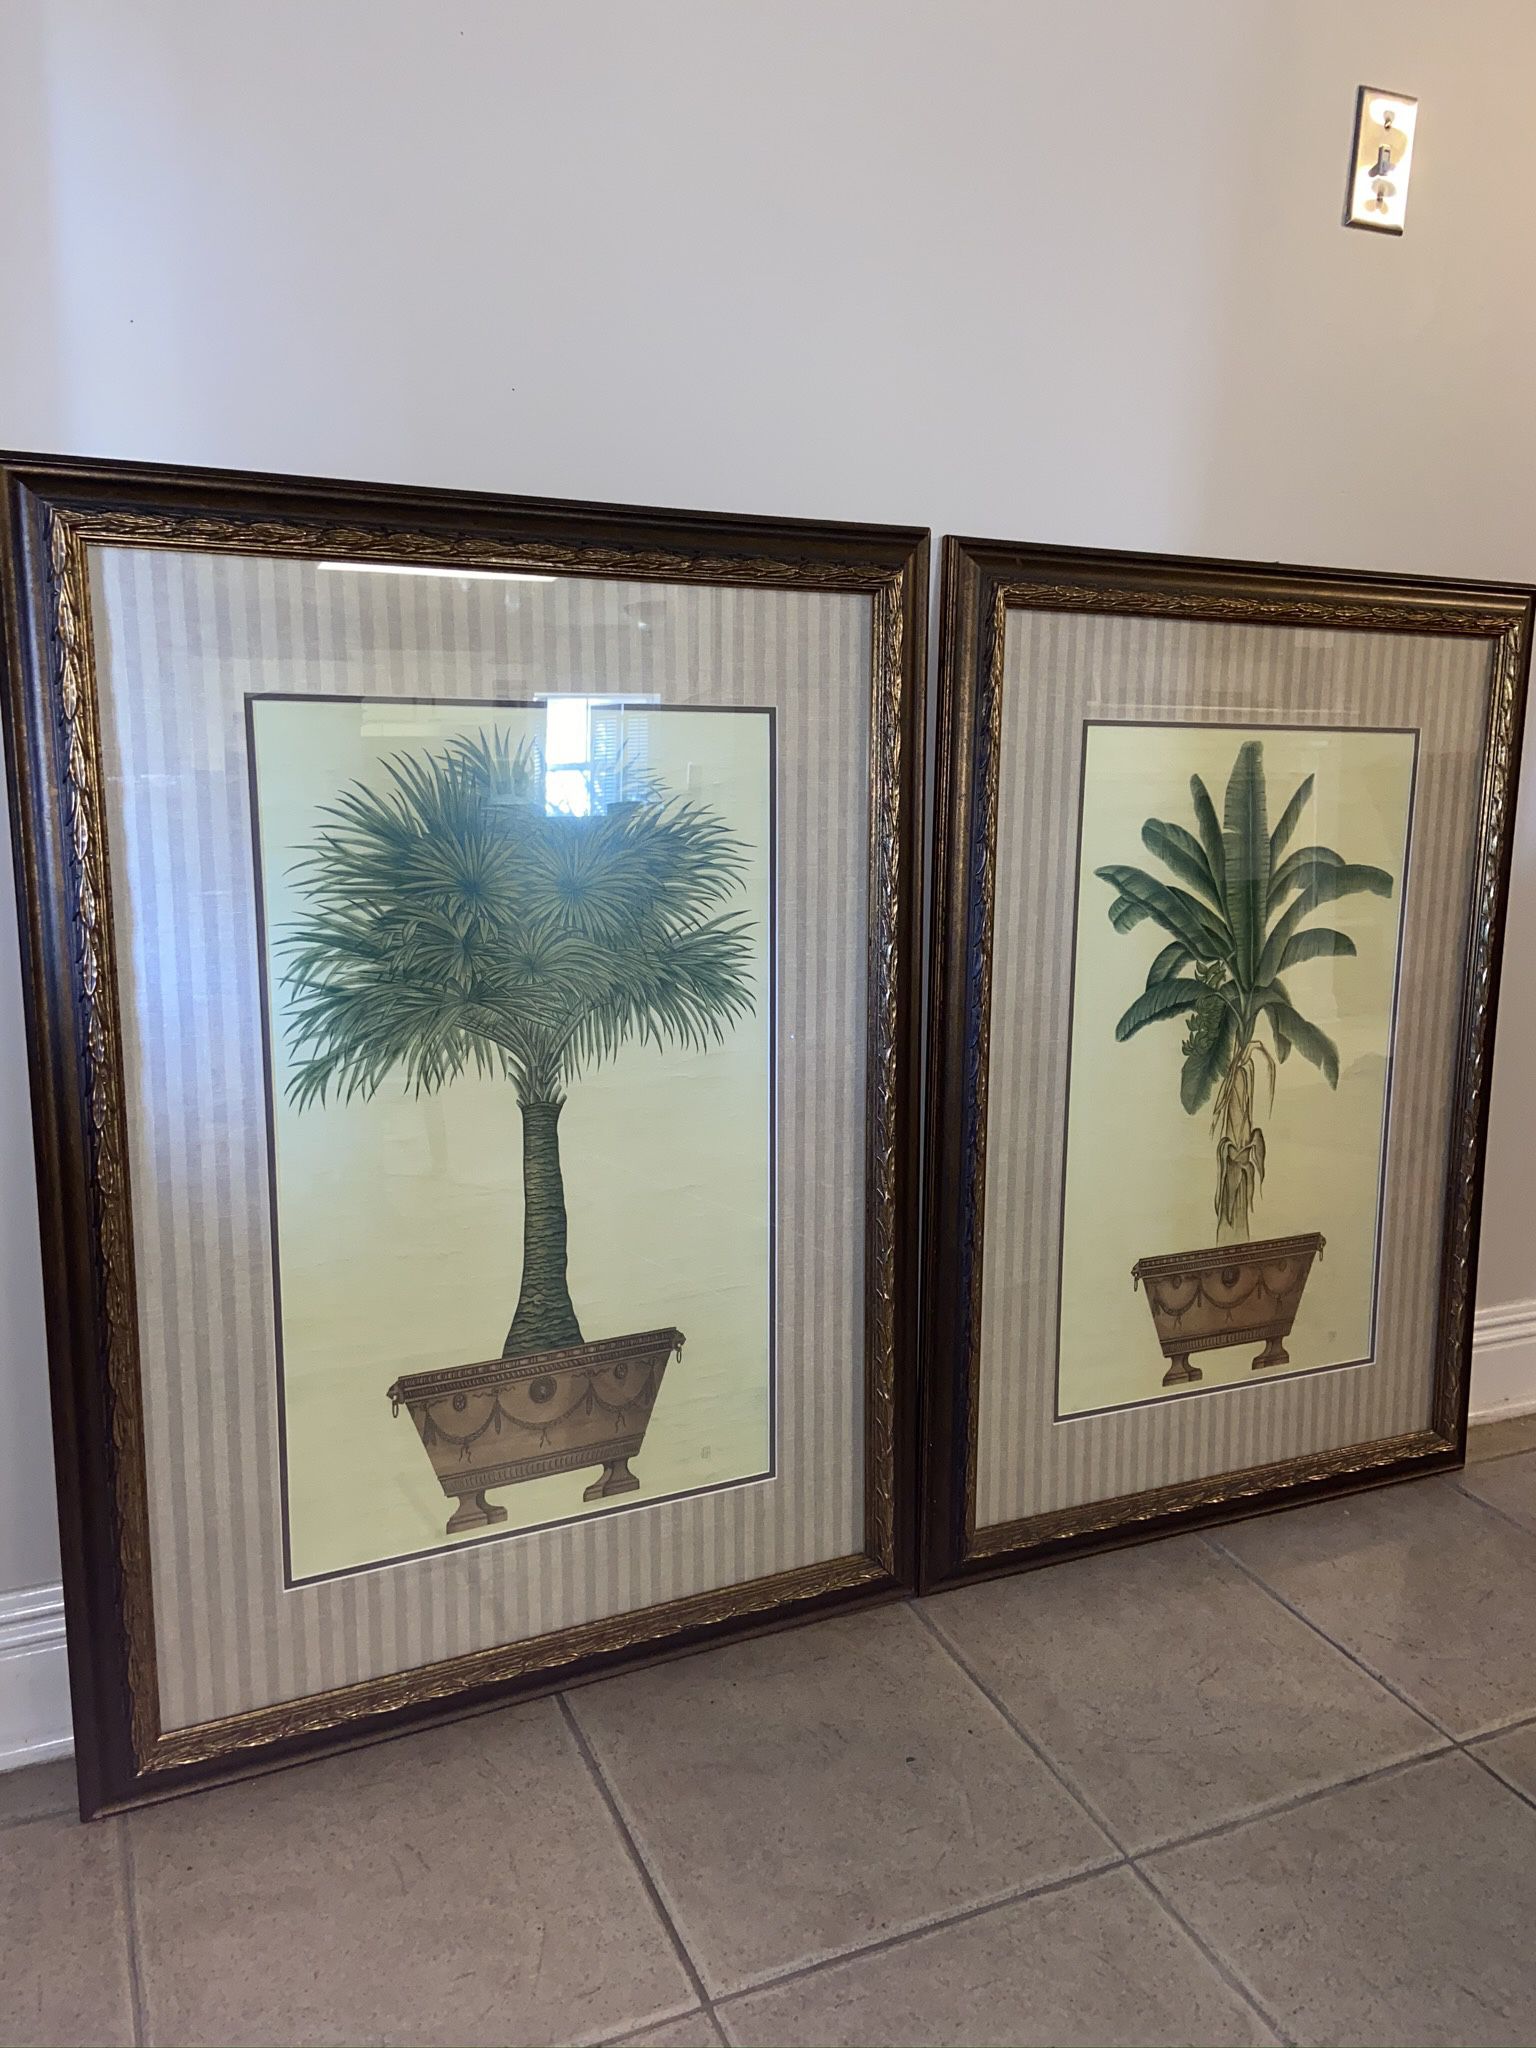 Palm Plant & Banana Tree Art Pictures with Custom Golden-Brown Ornate Frames 38x27